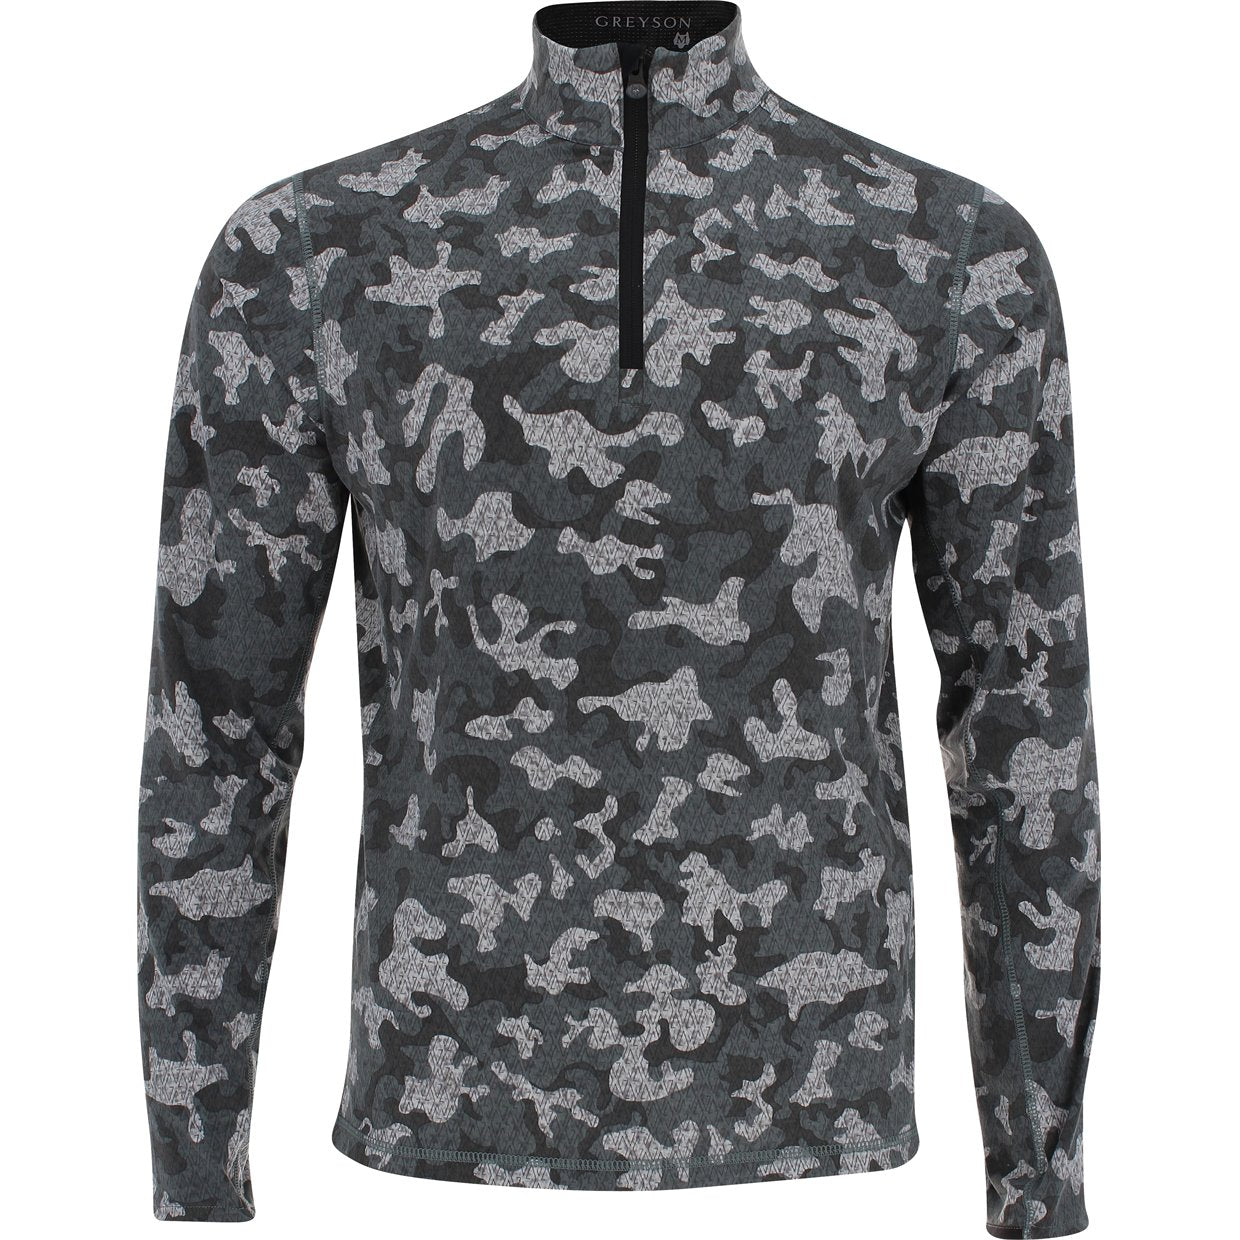 These 10 cool camouflage apparel pieces are perfect for fall golf